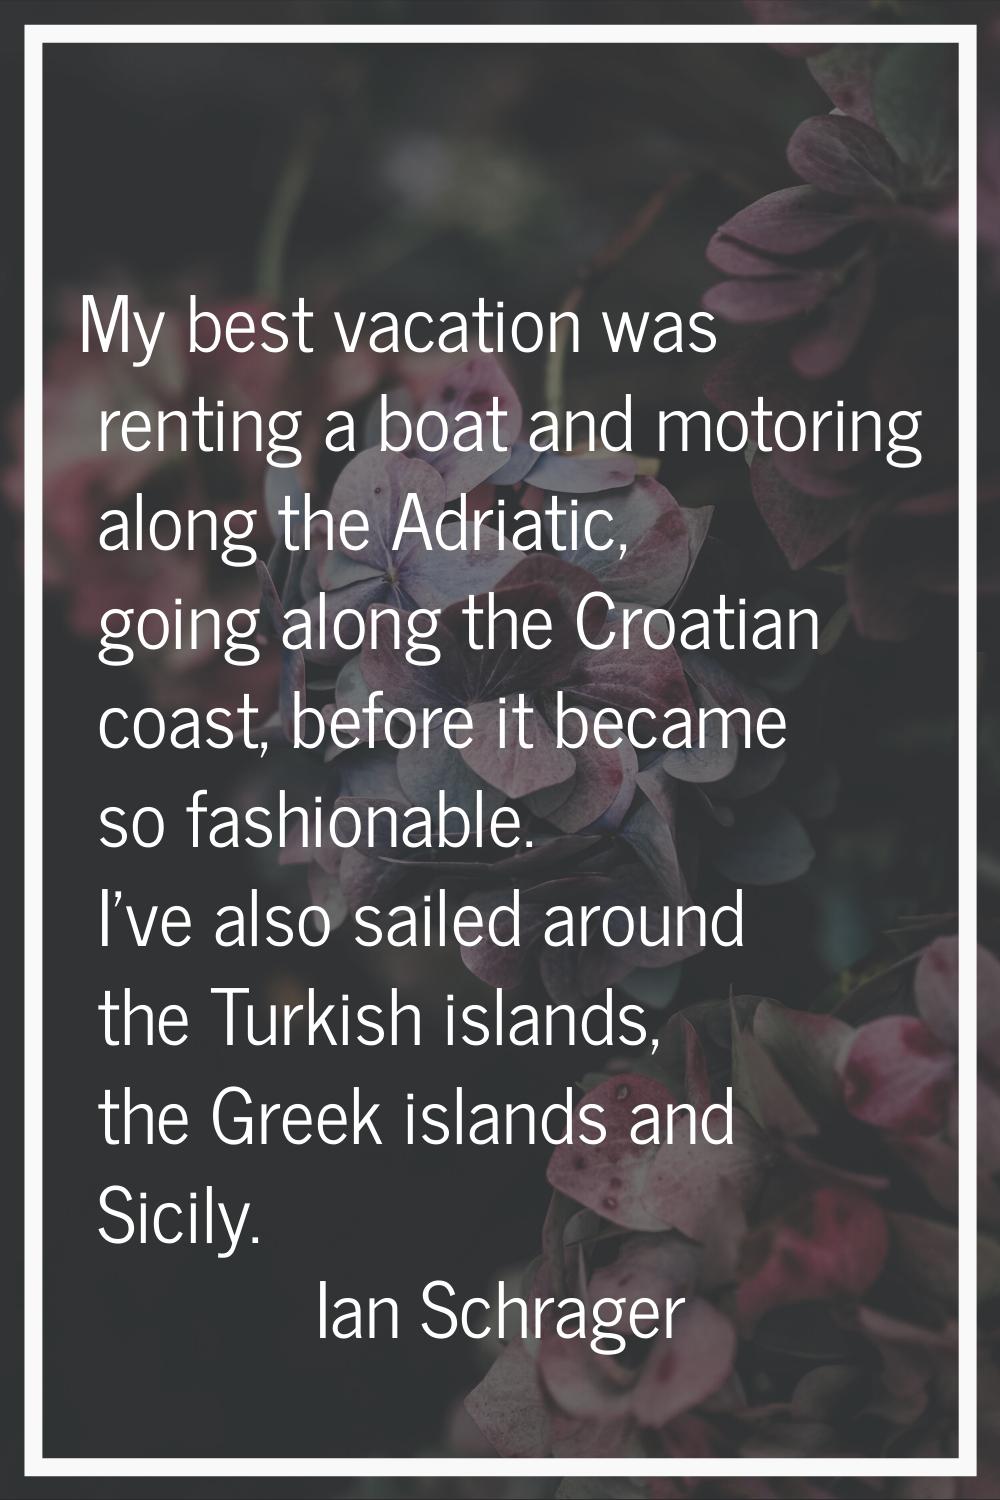 My best vacation was renting a boat and motoring along the Adriatic, going along the Croatian coast